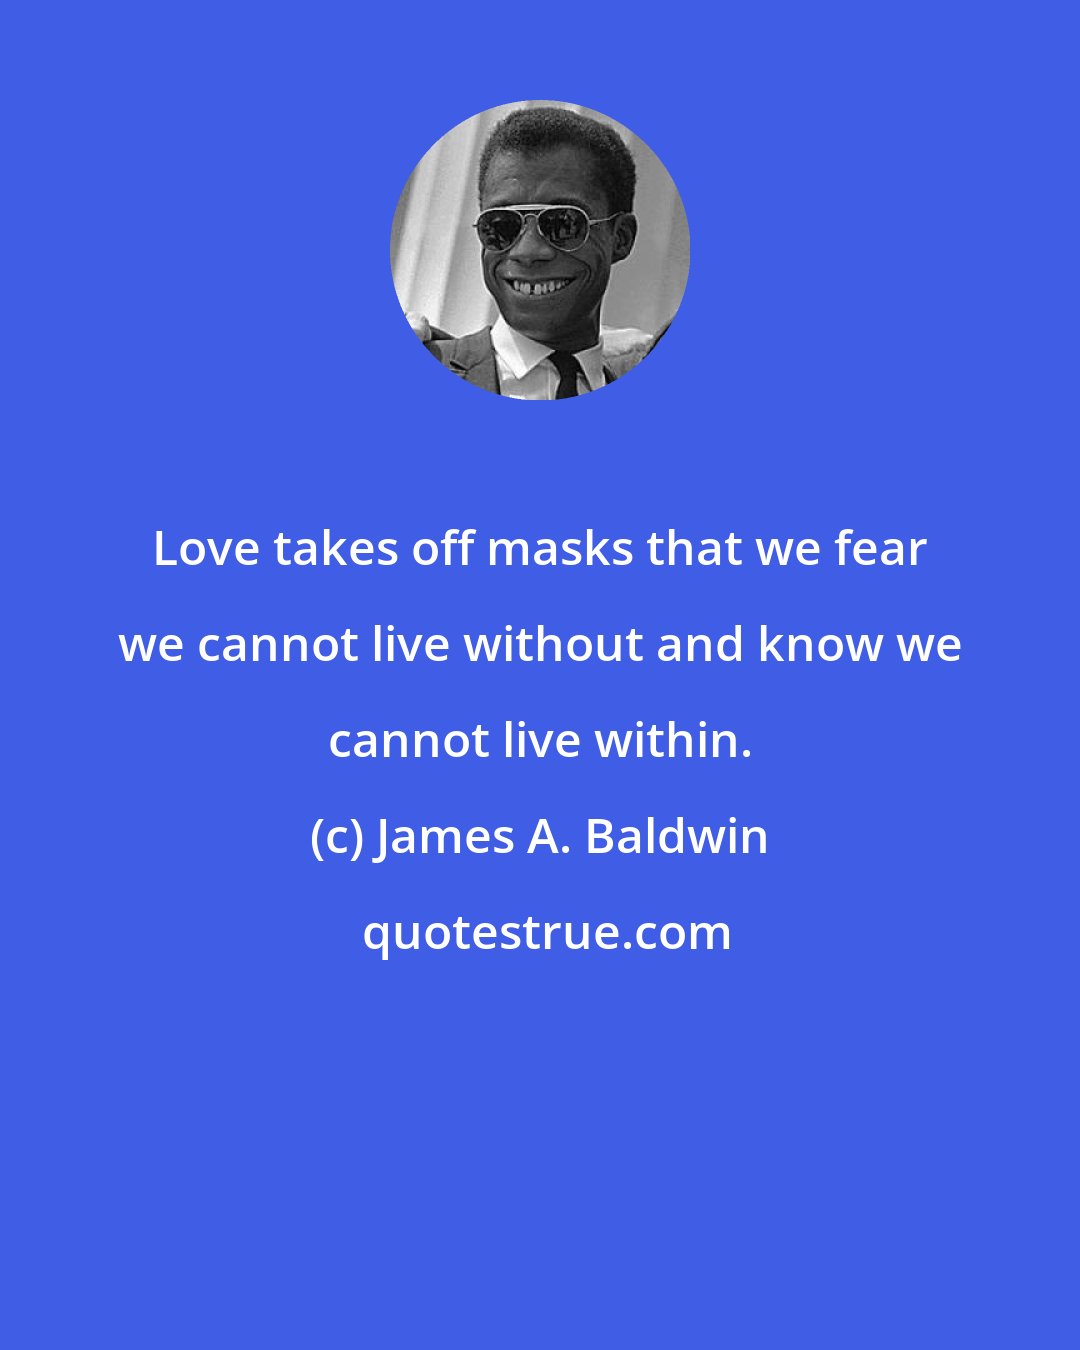 James A. Baldwin: Love takes off masks that we fear we cannot live without and know we cannot live within.